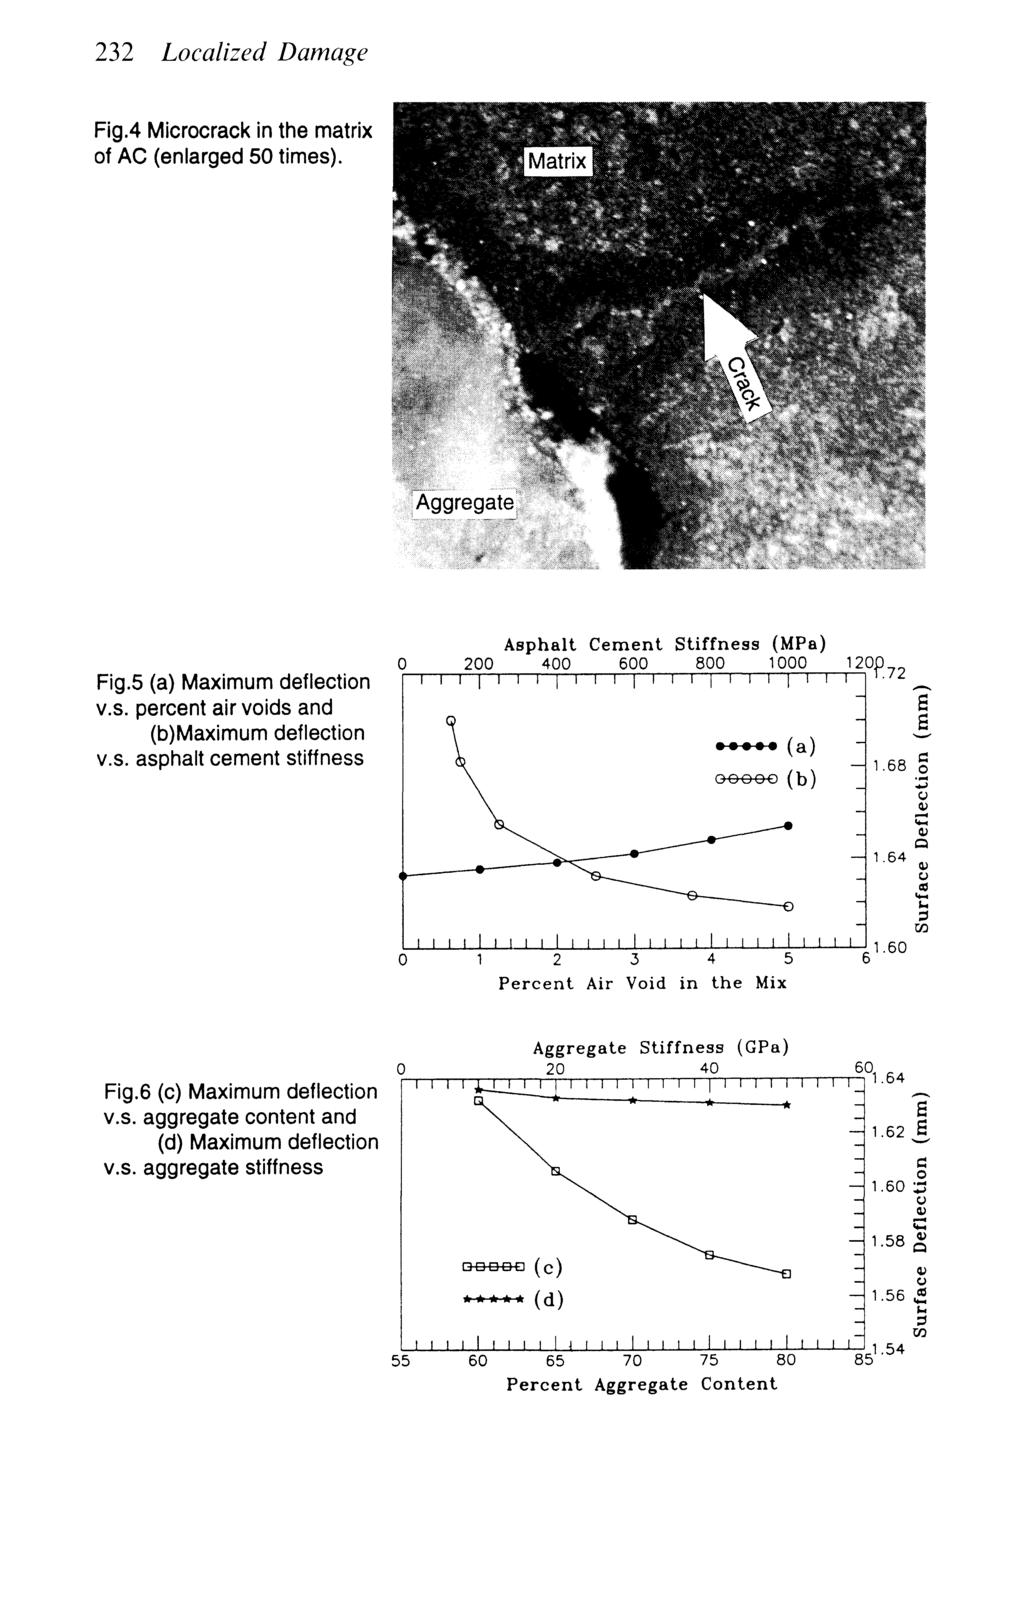 232 Localized Damage Fig.4 Microcrack in the matrix of AC (enlarged 50 times). Aggregate Fig.5 (a) Maximum deflection v.s. percent air voids and (b)maximum deflection v.s. asphalt cement stiffness Asphalt Cement Stiffness (MPa) 200 400 600 800 1000 1 2 3 4 5 Percent Air Void in the Mix Fig.